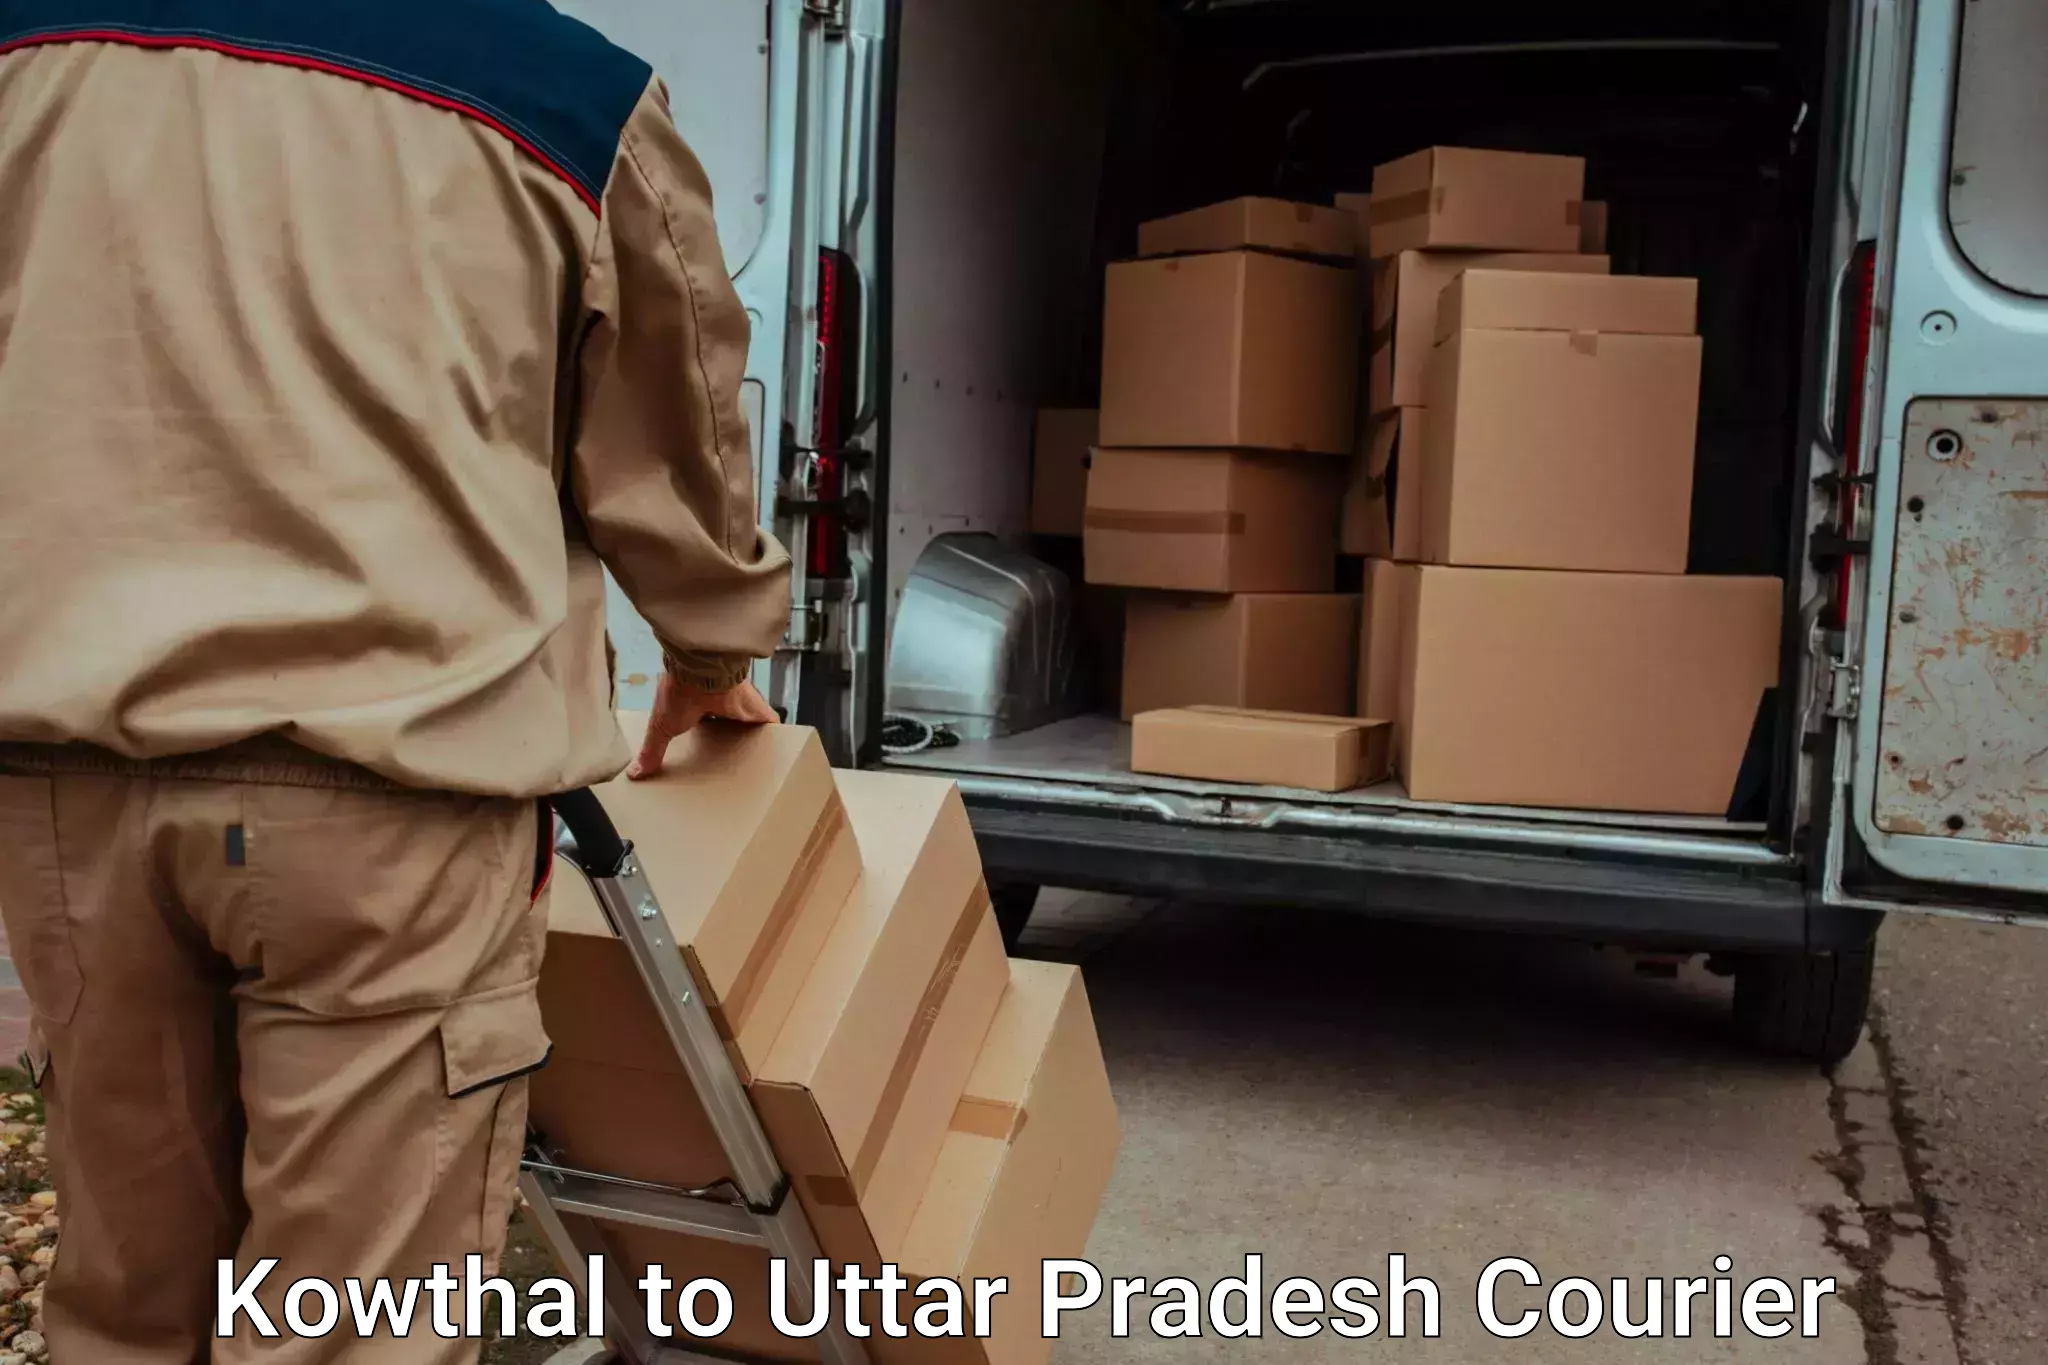 Furniture moving specialists in Kowthal to Vrindavan